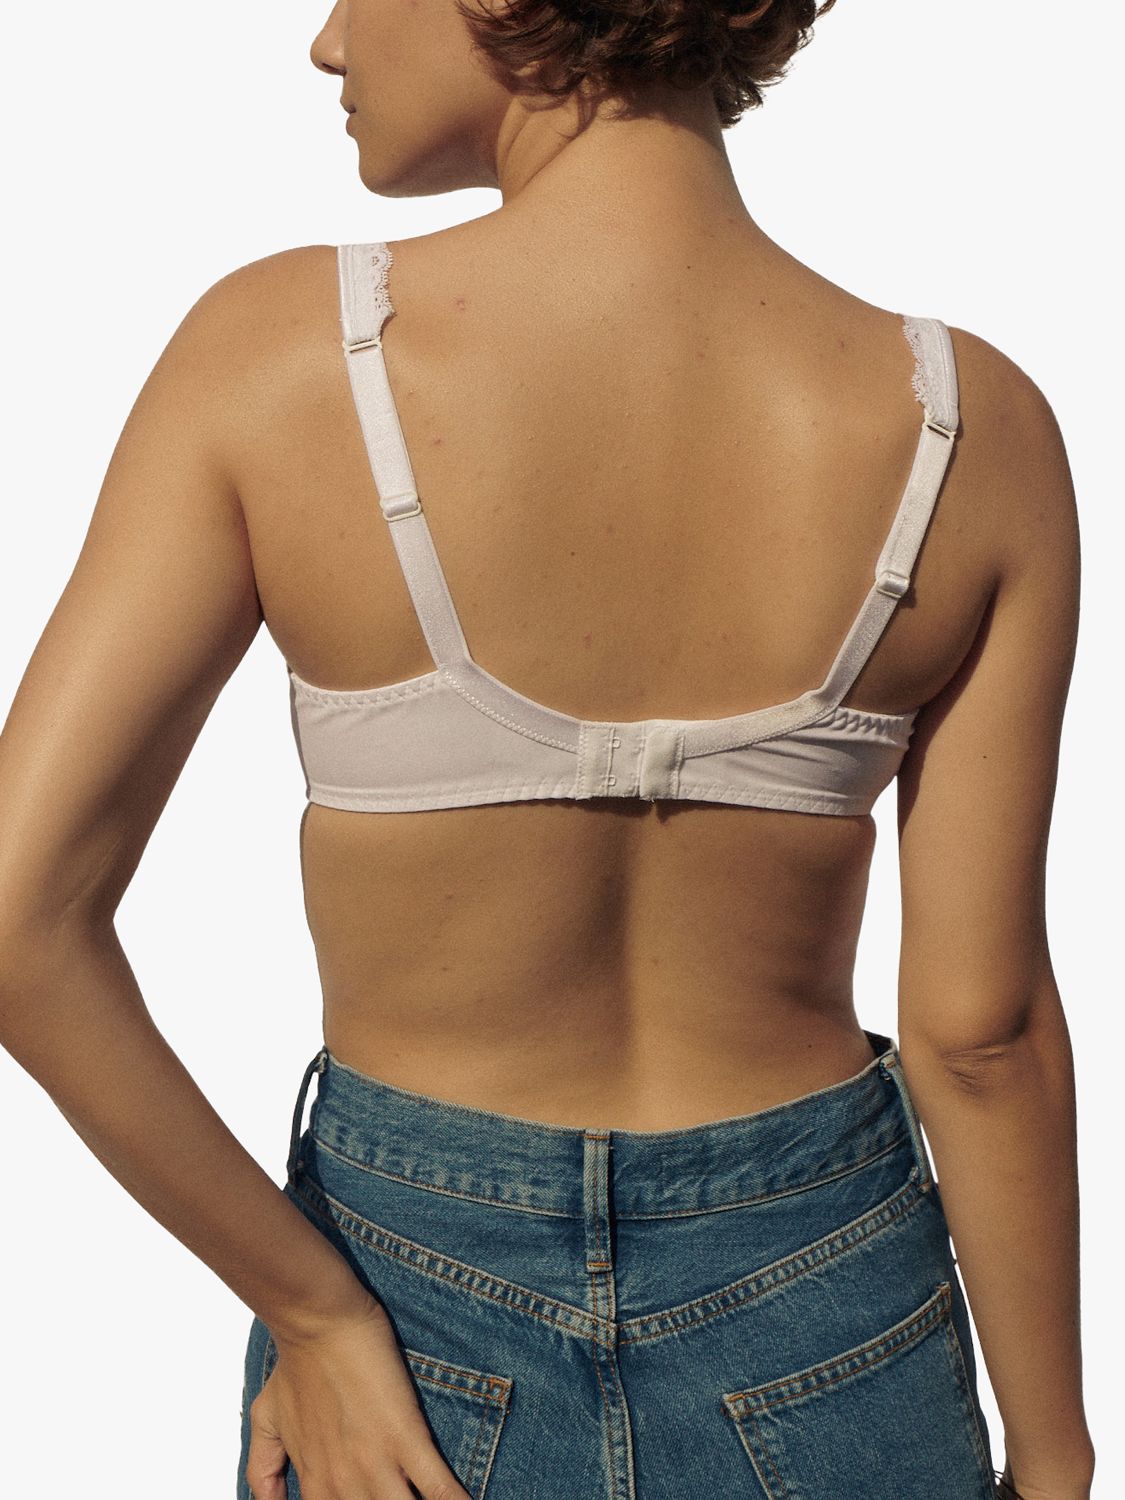 Buy Maison Lejaby Gaby Lace Full Cup Underwired Bra Online at johnlewis.com